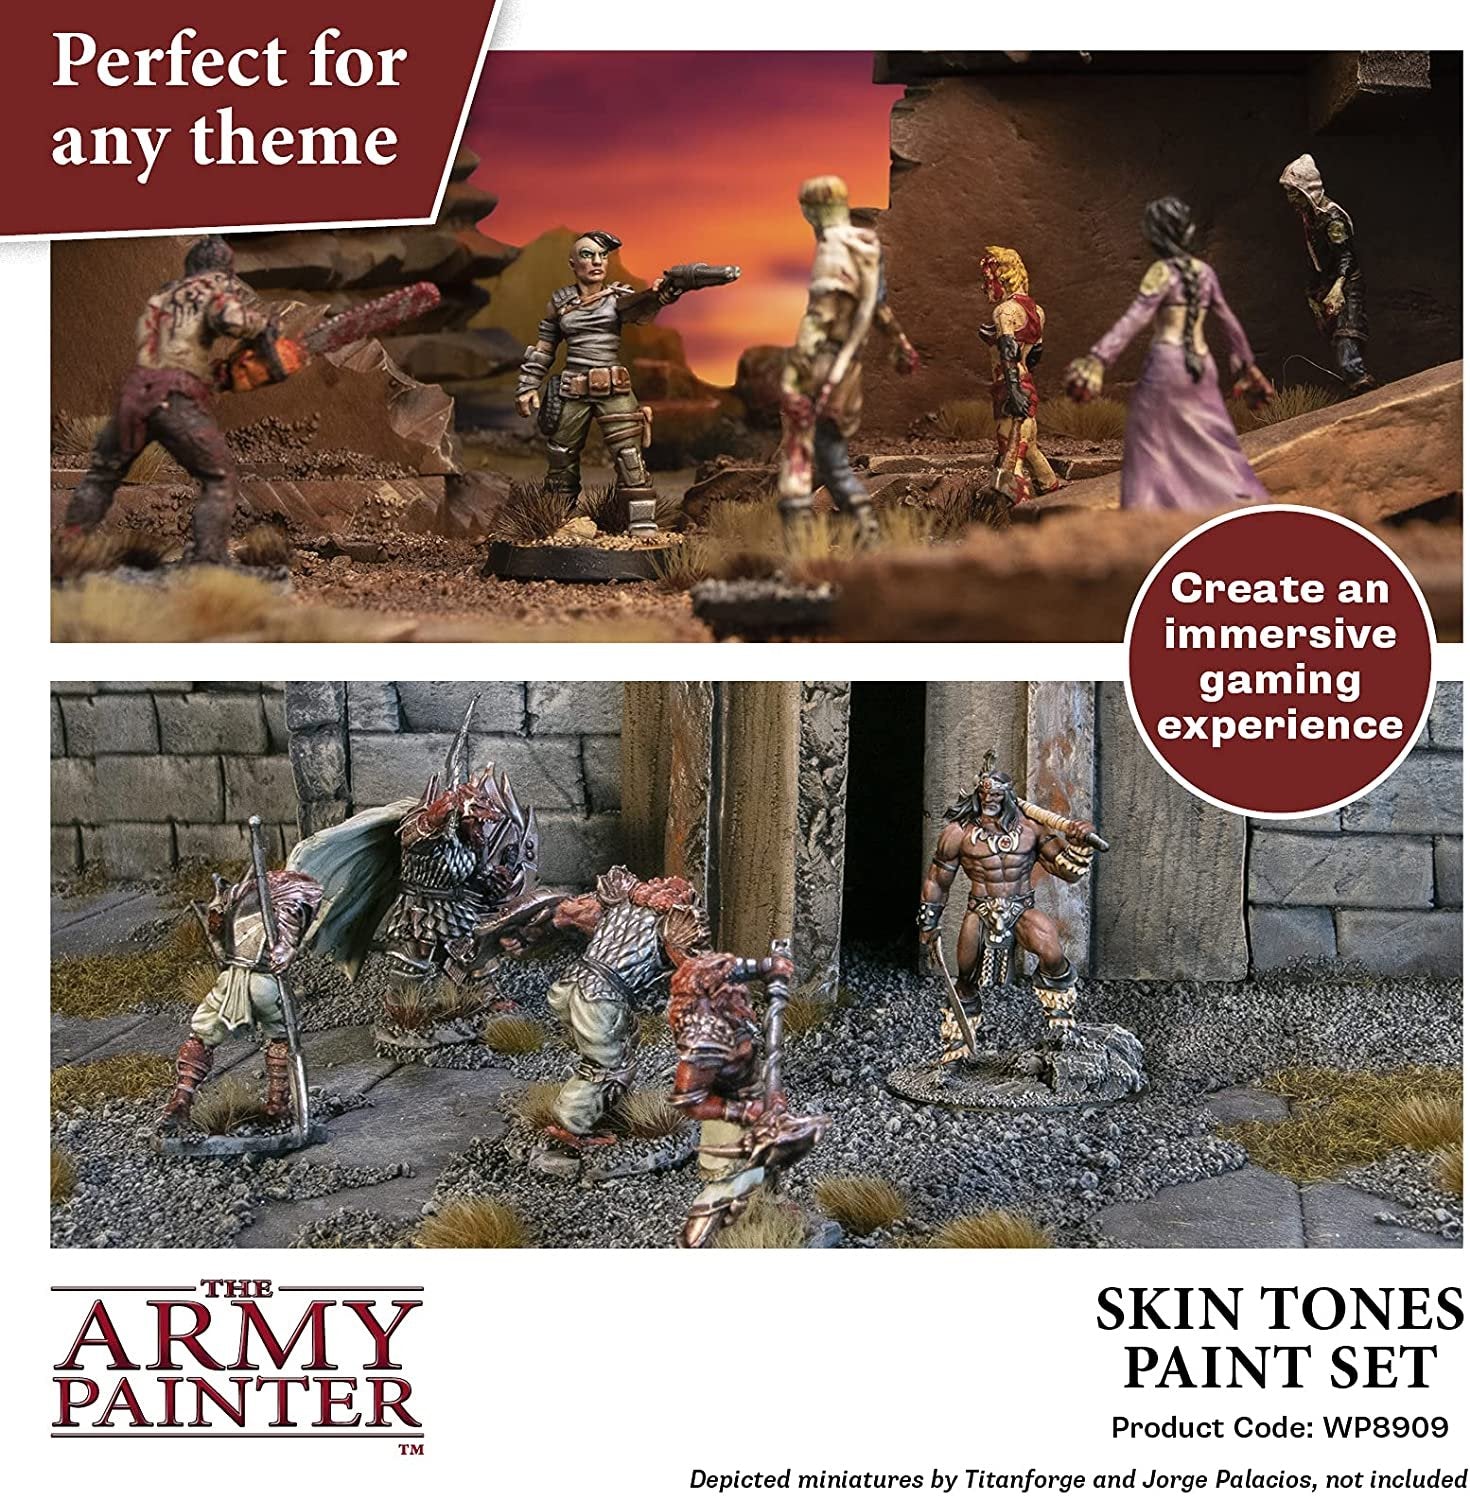 The Army Painter: Warpaint, Mixing Medium